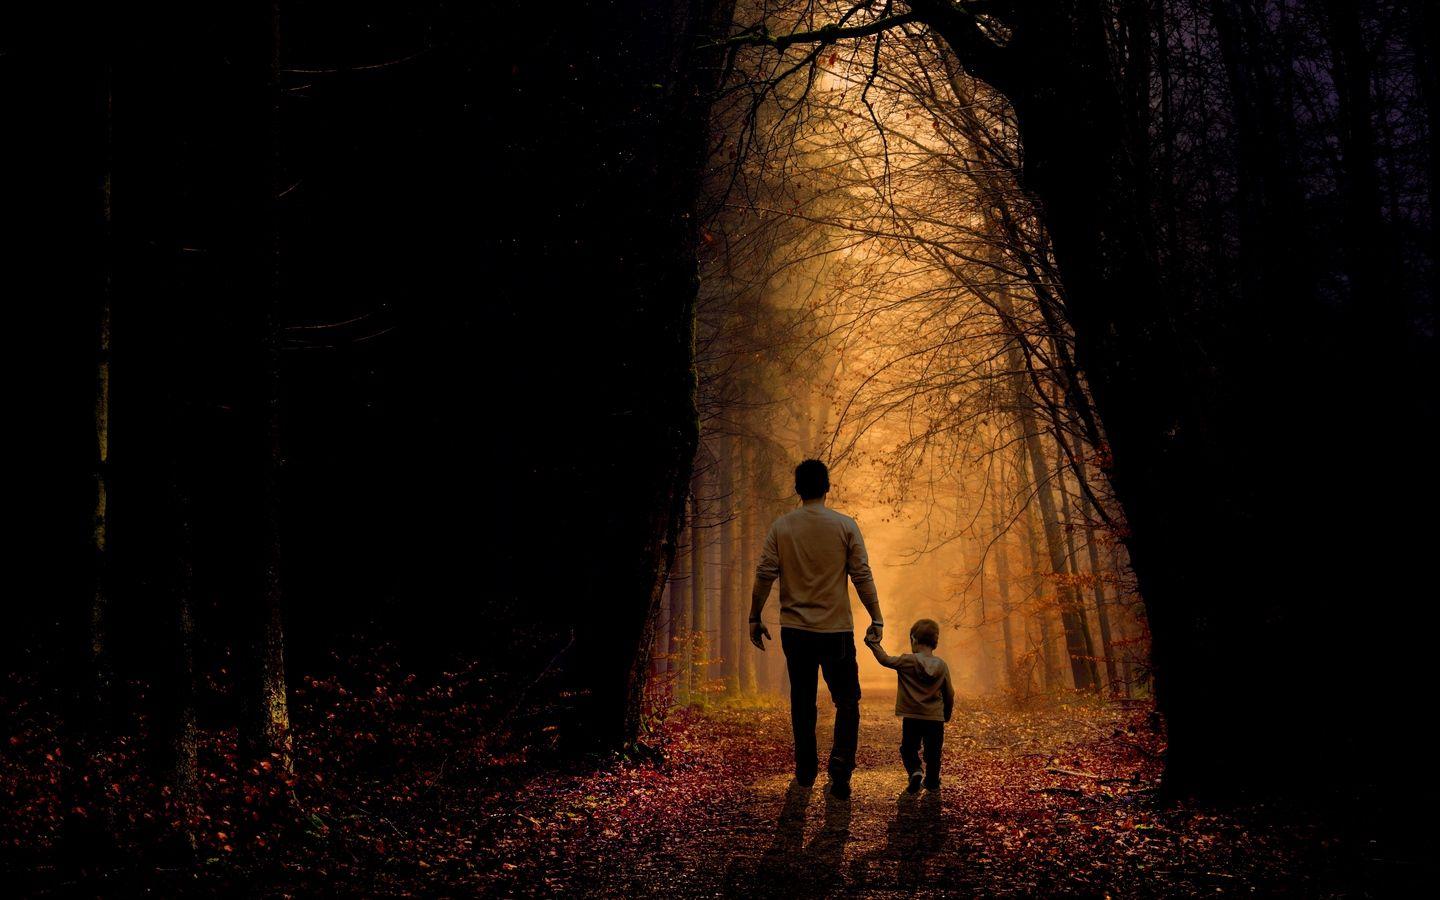 Download wallpaper 1440x900 father, son, family, child, forest